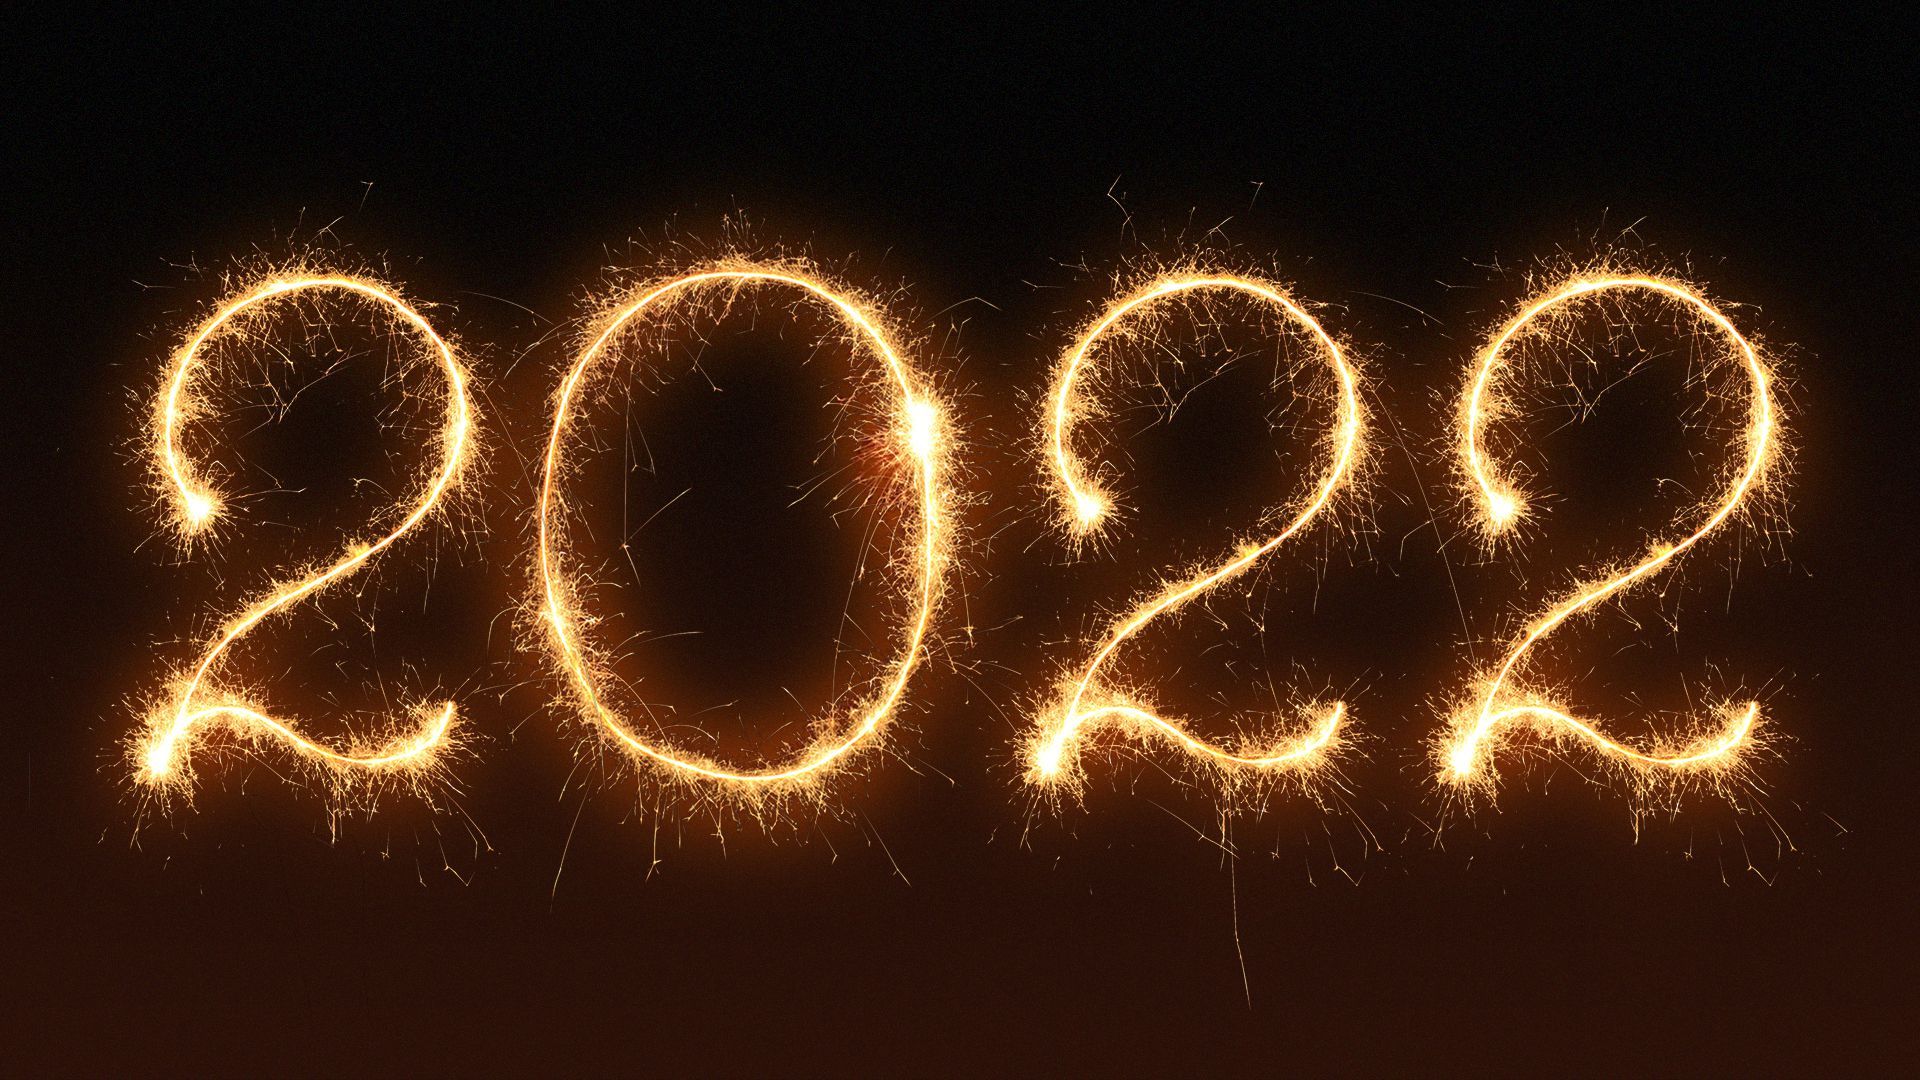 Illustration of the year "2022" written in sparklers